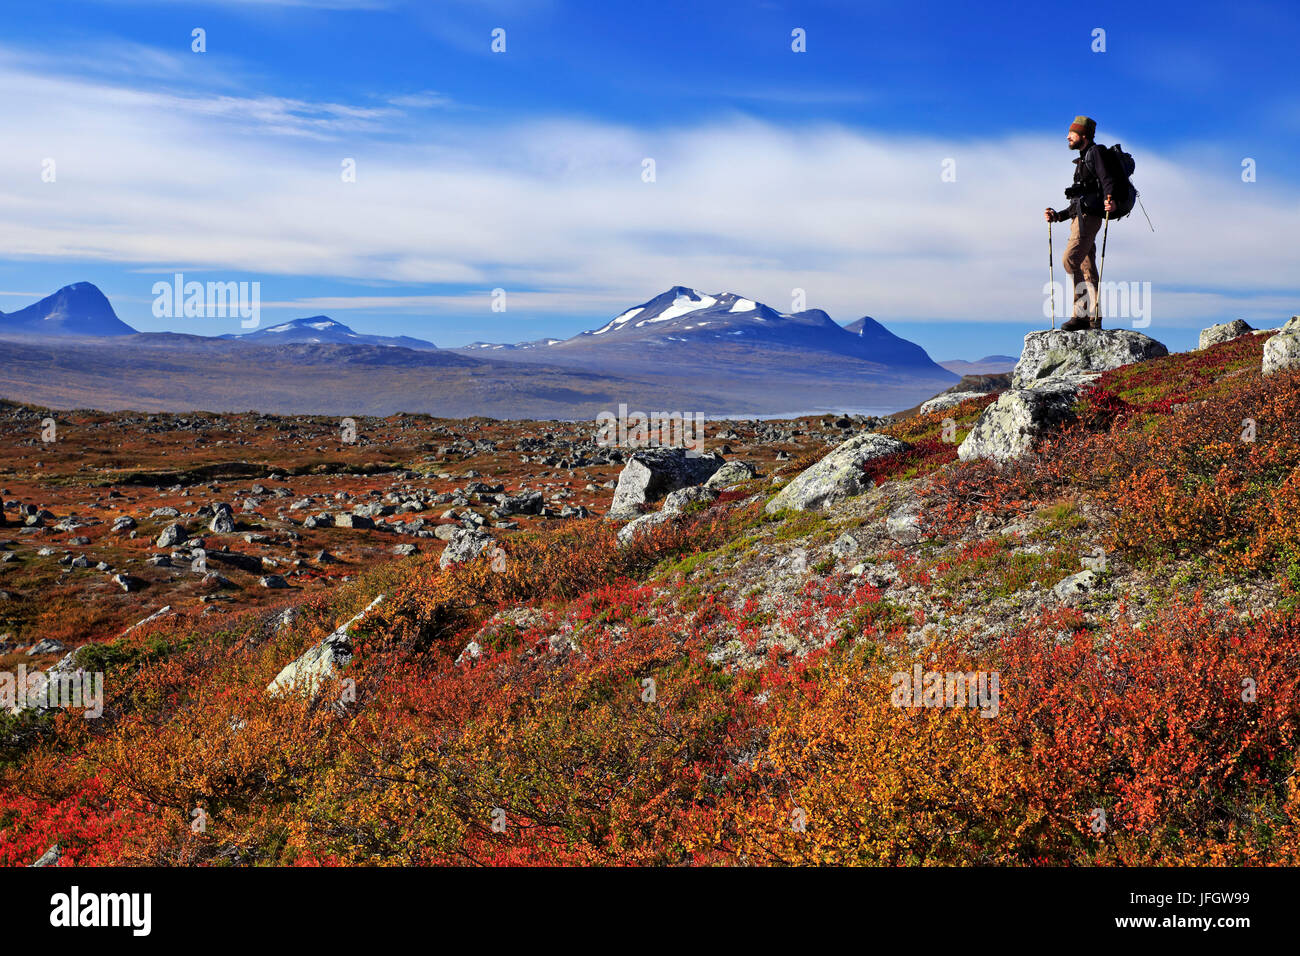 Europe, Sweden, Lapland, province of Norrbotten, Stora Sjöfallets national park, view of the Kungsleden on the Akka mountain massif Stock Photo